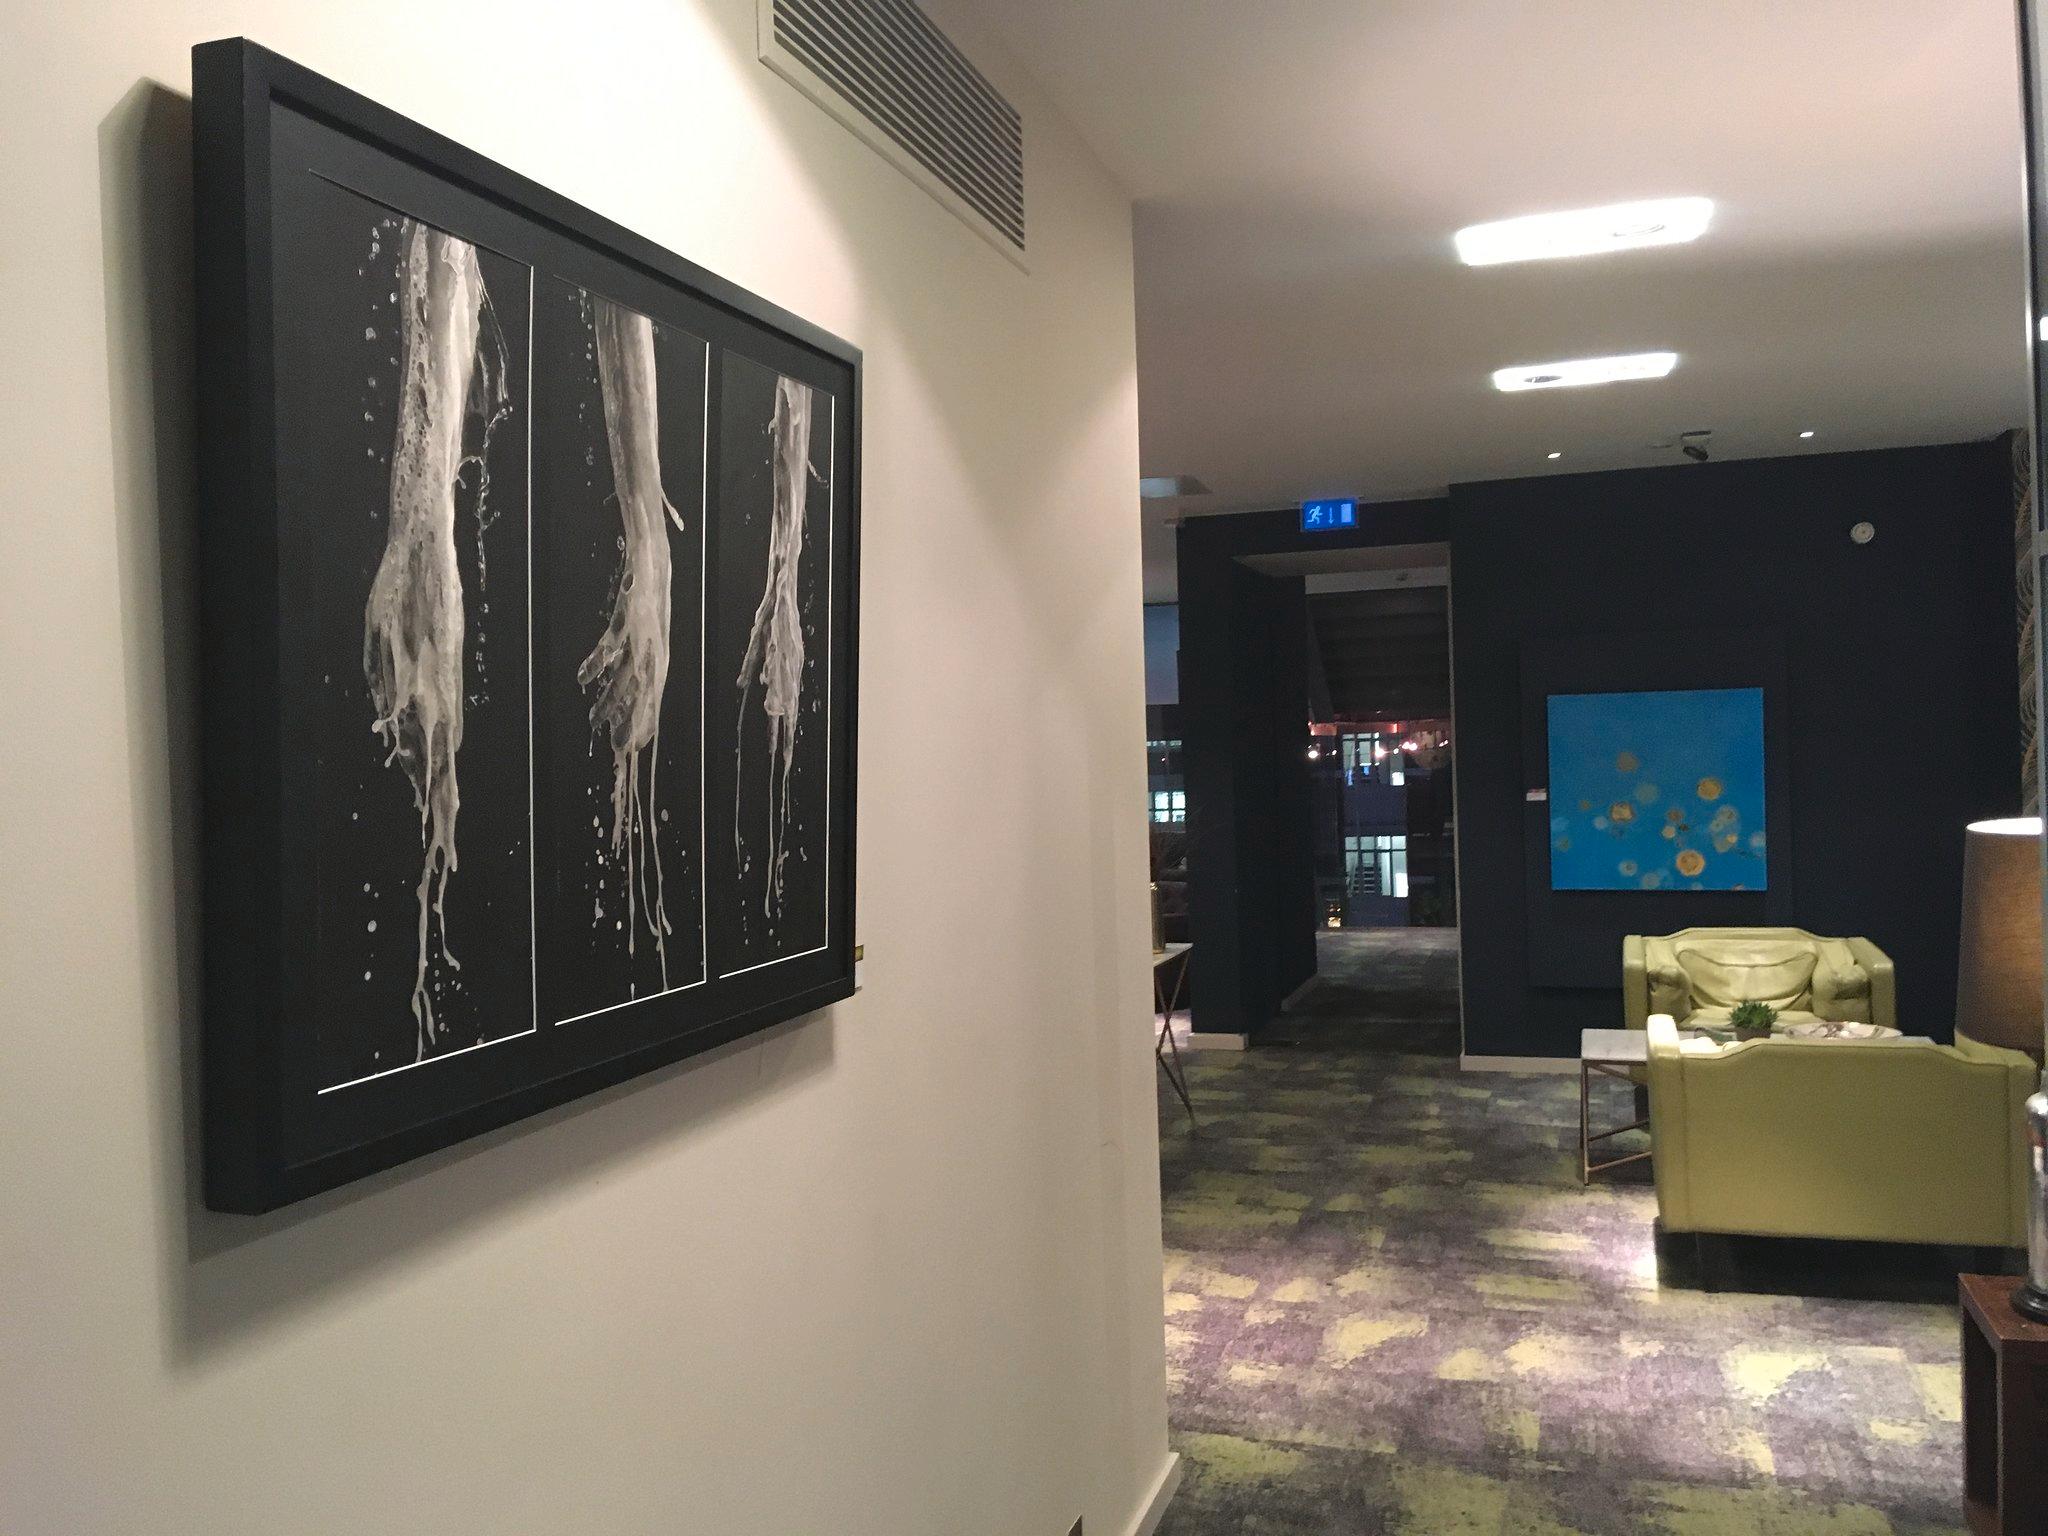 triptych - three separate drawings mounted and framed
possible to buy separately - each piece £750 

Jose Ladron de Guevara works in oil, charcoal, graphite and pastel. He is fascinated by trying to capture a fleeting moment in his paintings and to